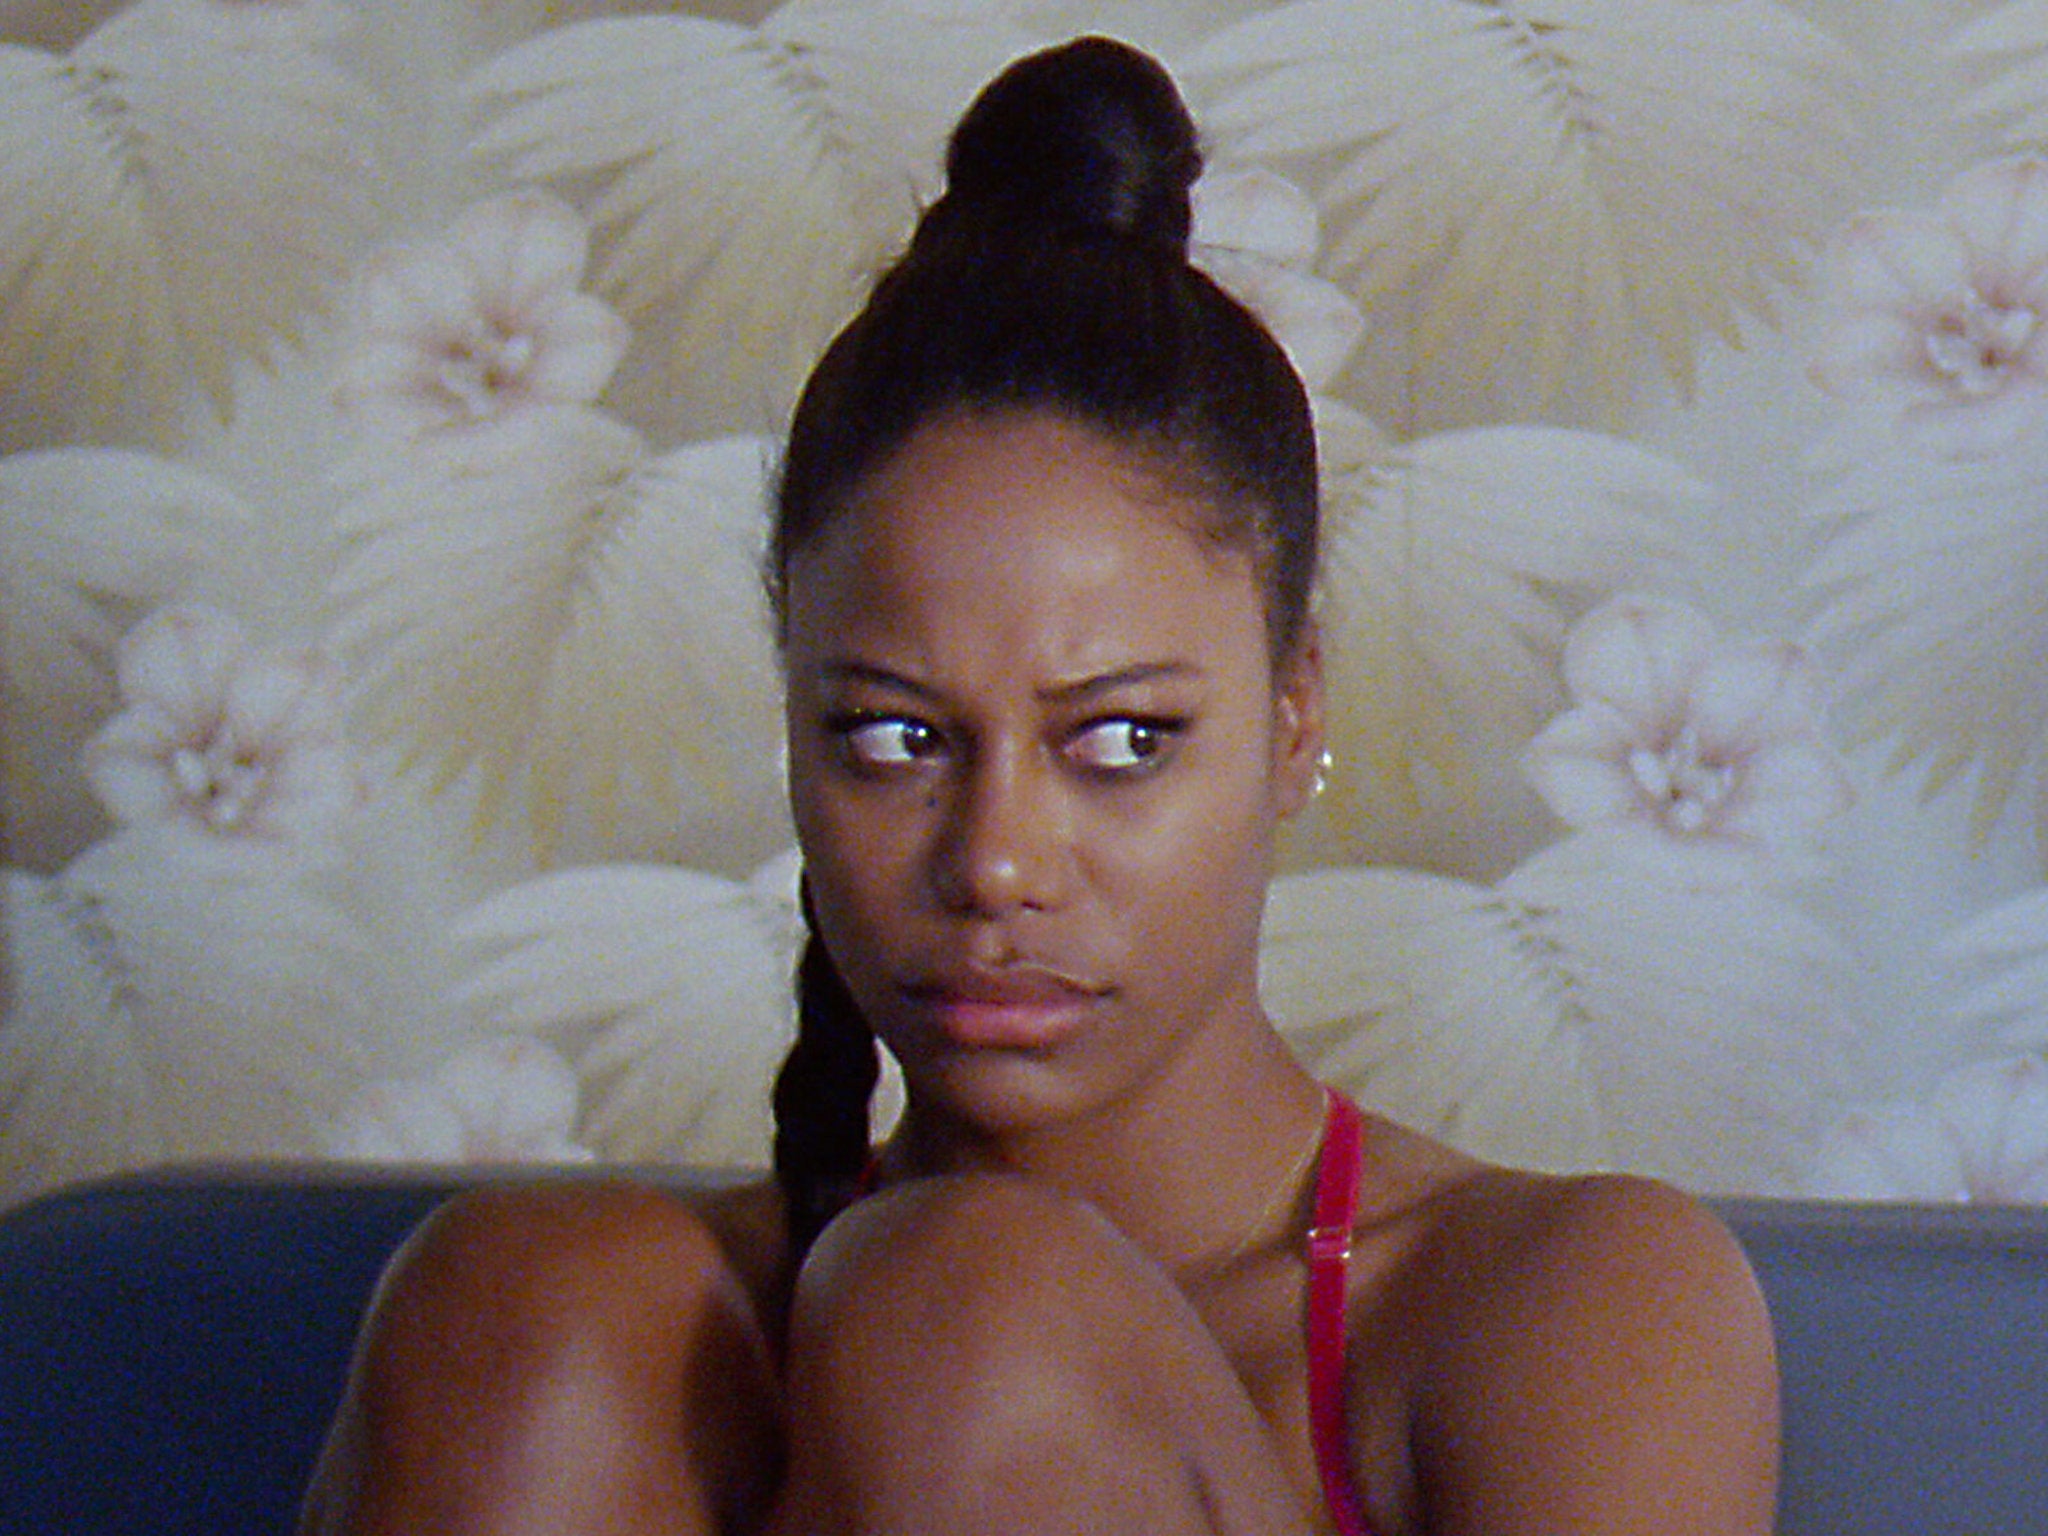 Taylour Paige initially denied the chance to play Zola in the film’s first iteration under James Franco’s production